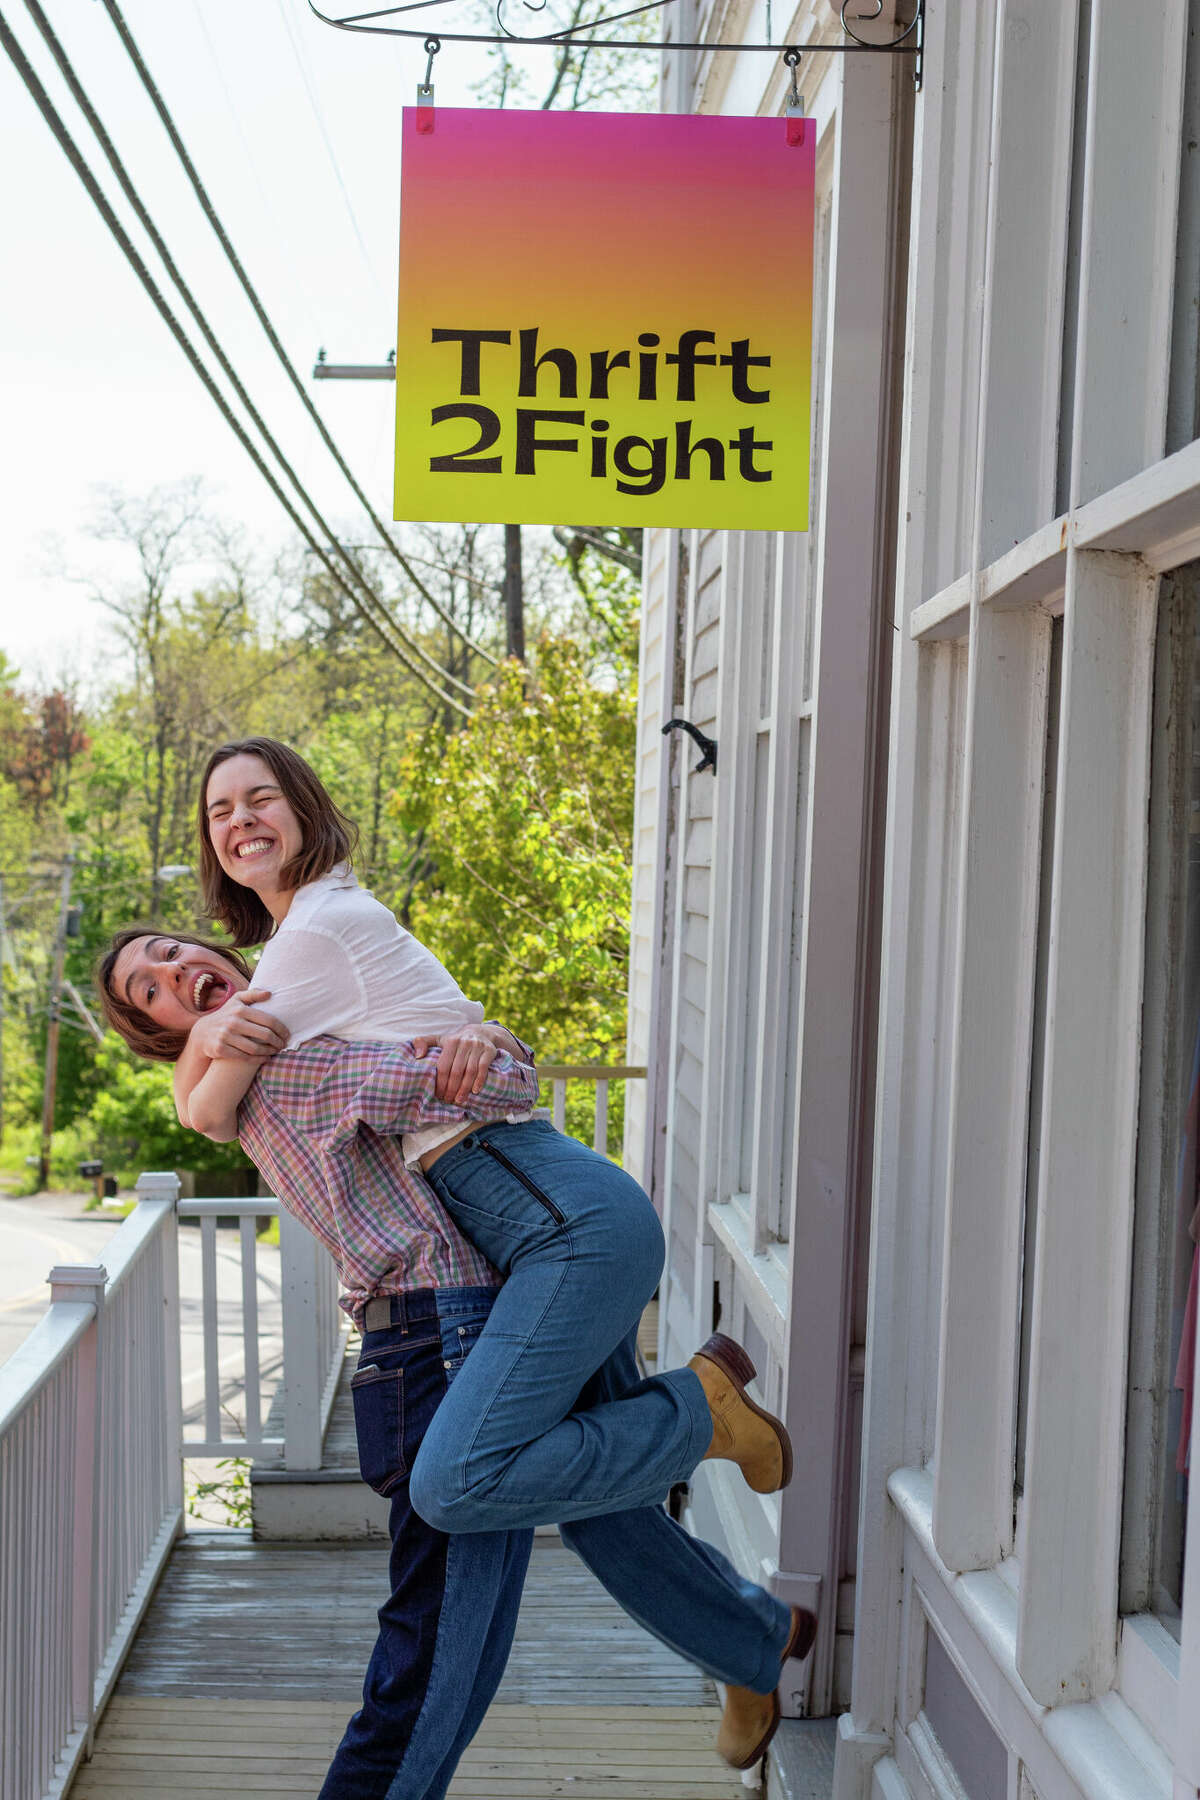 Thrift 2 Struggle’s mission is powered by garments and group